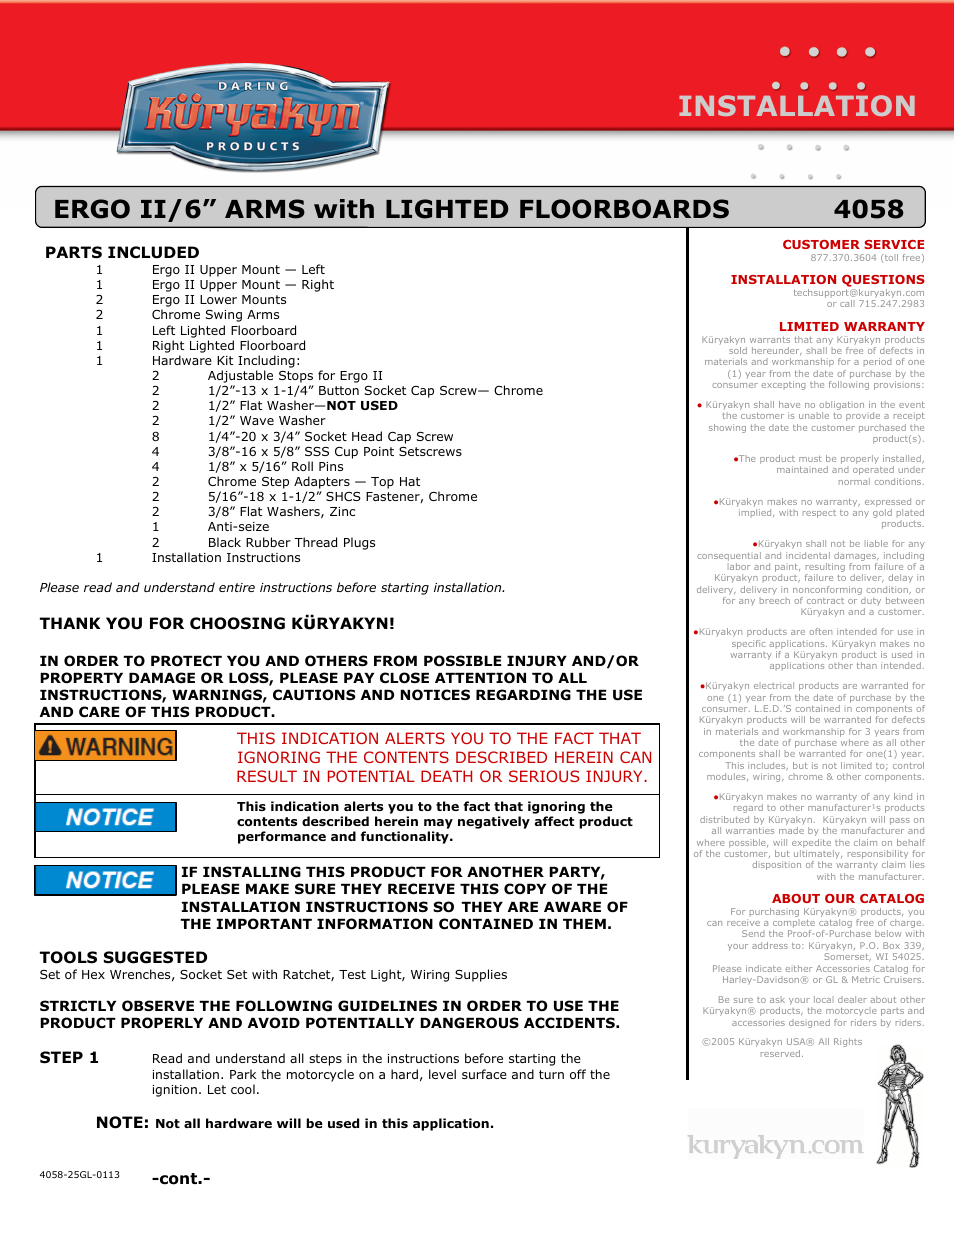 4058 ERGO II/6 ARMS with LIGHTED FLOORBOARDS